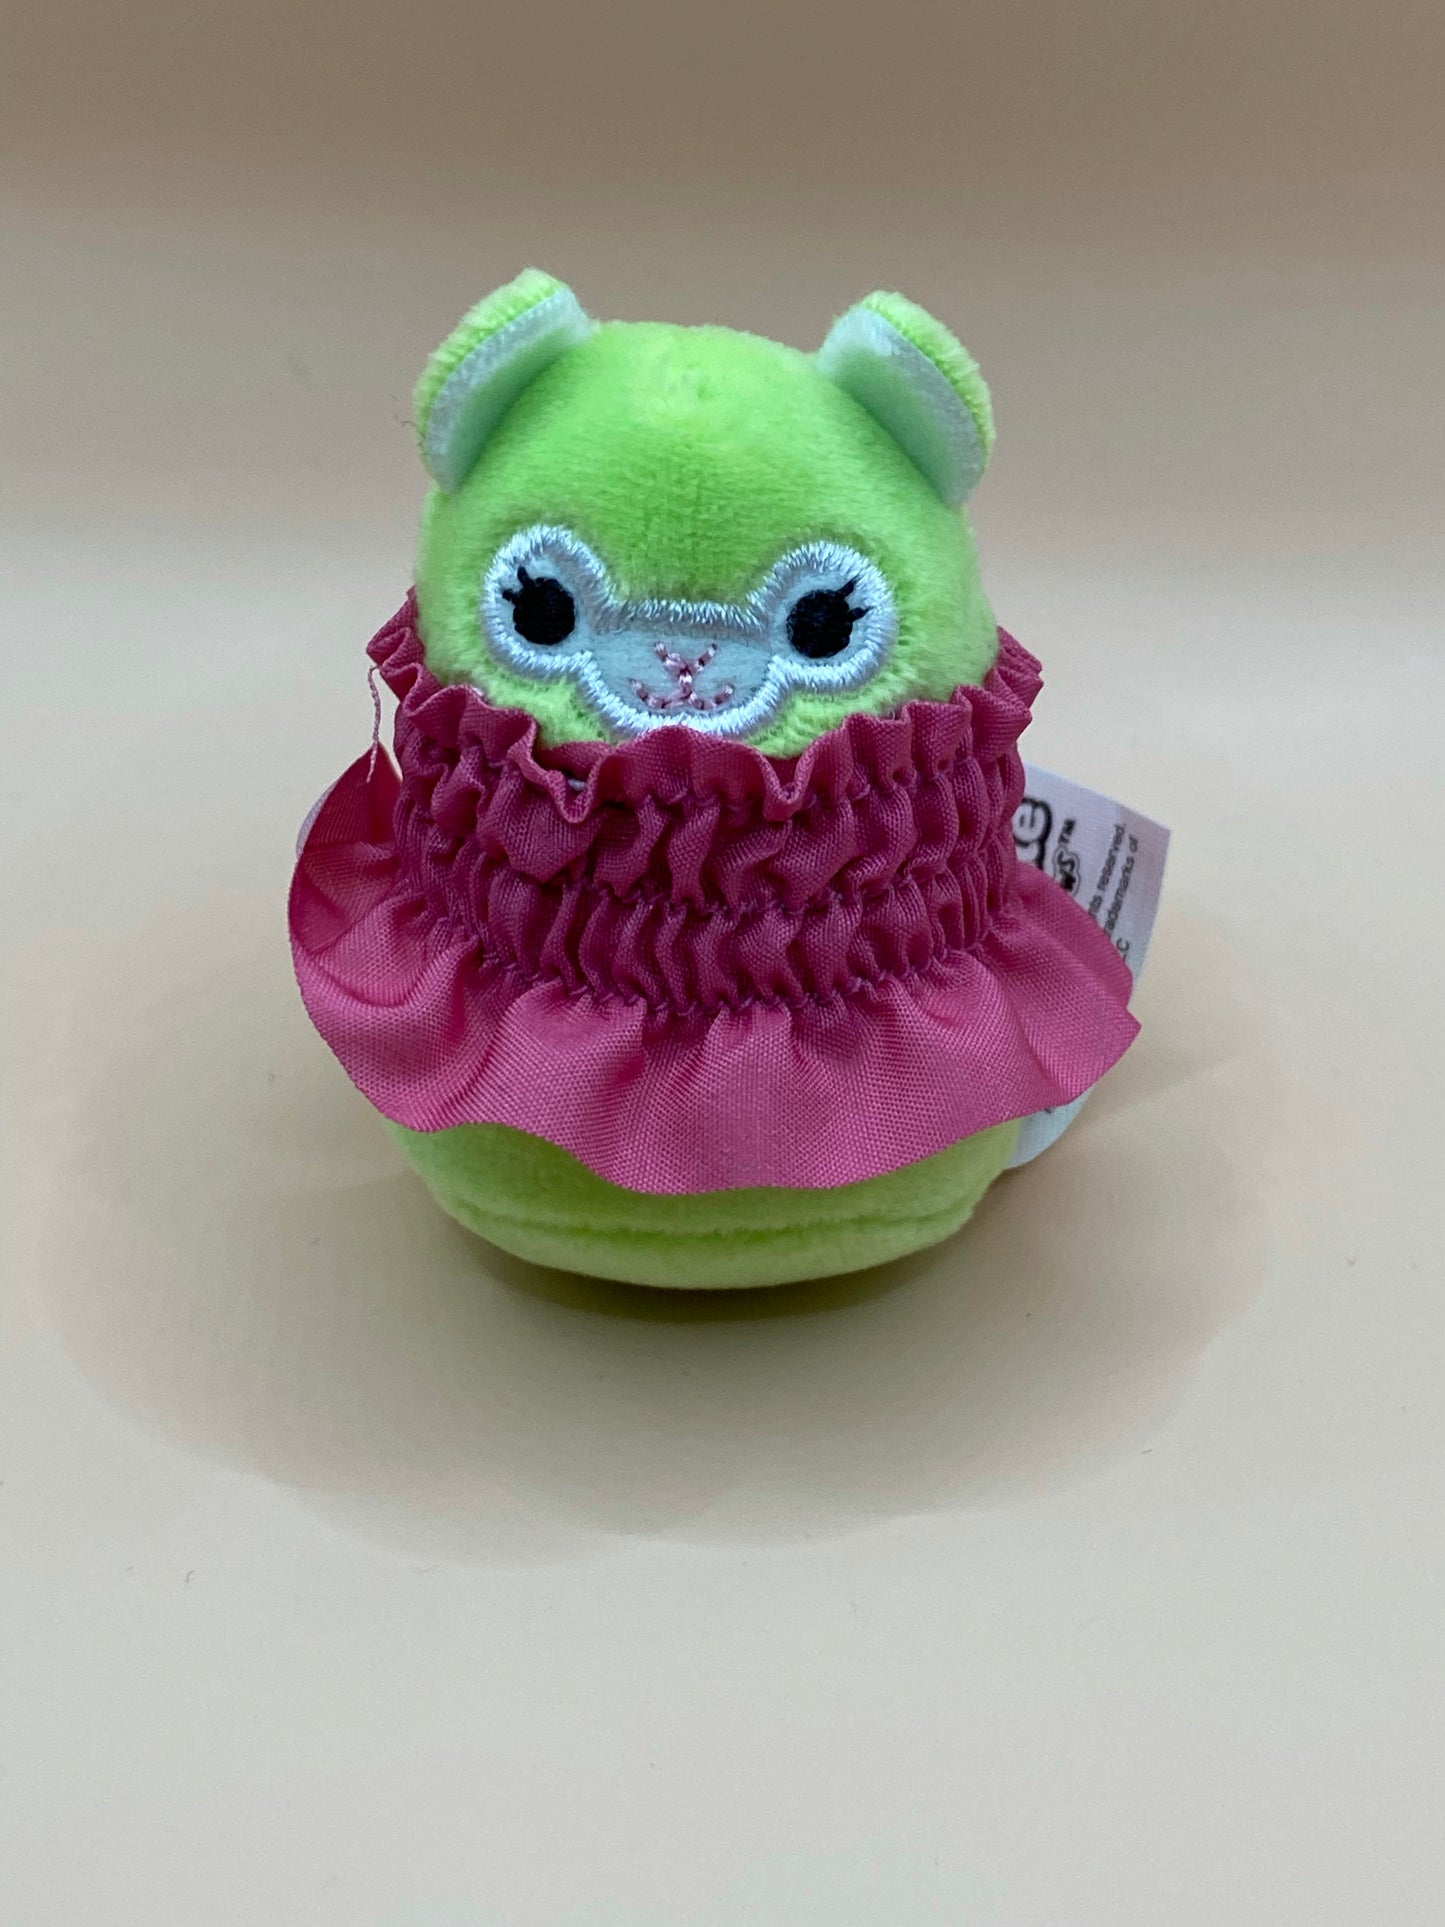 Green Llama with Purple Dress ~ 2" Individual Squishville by Squishmallows